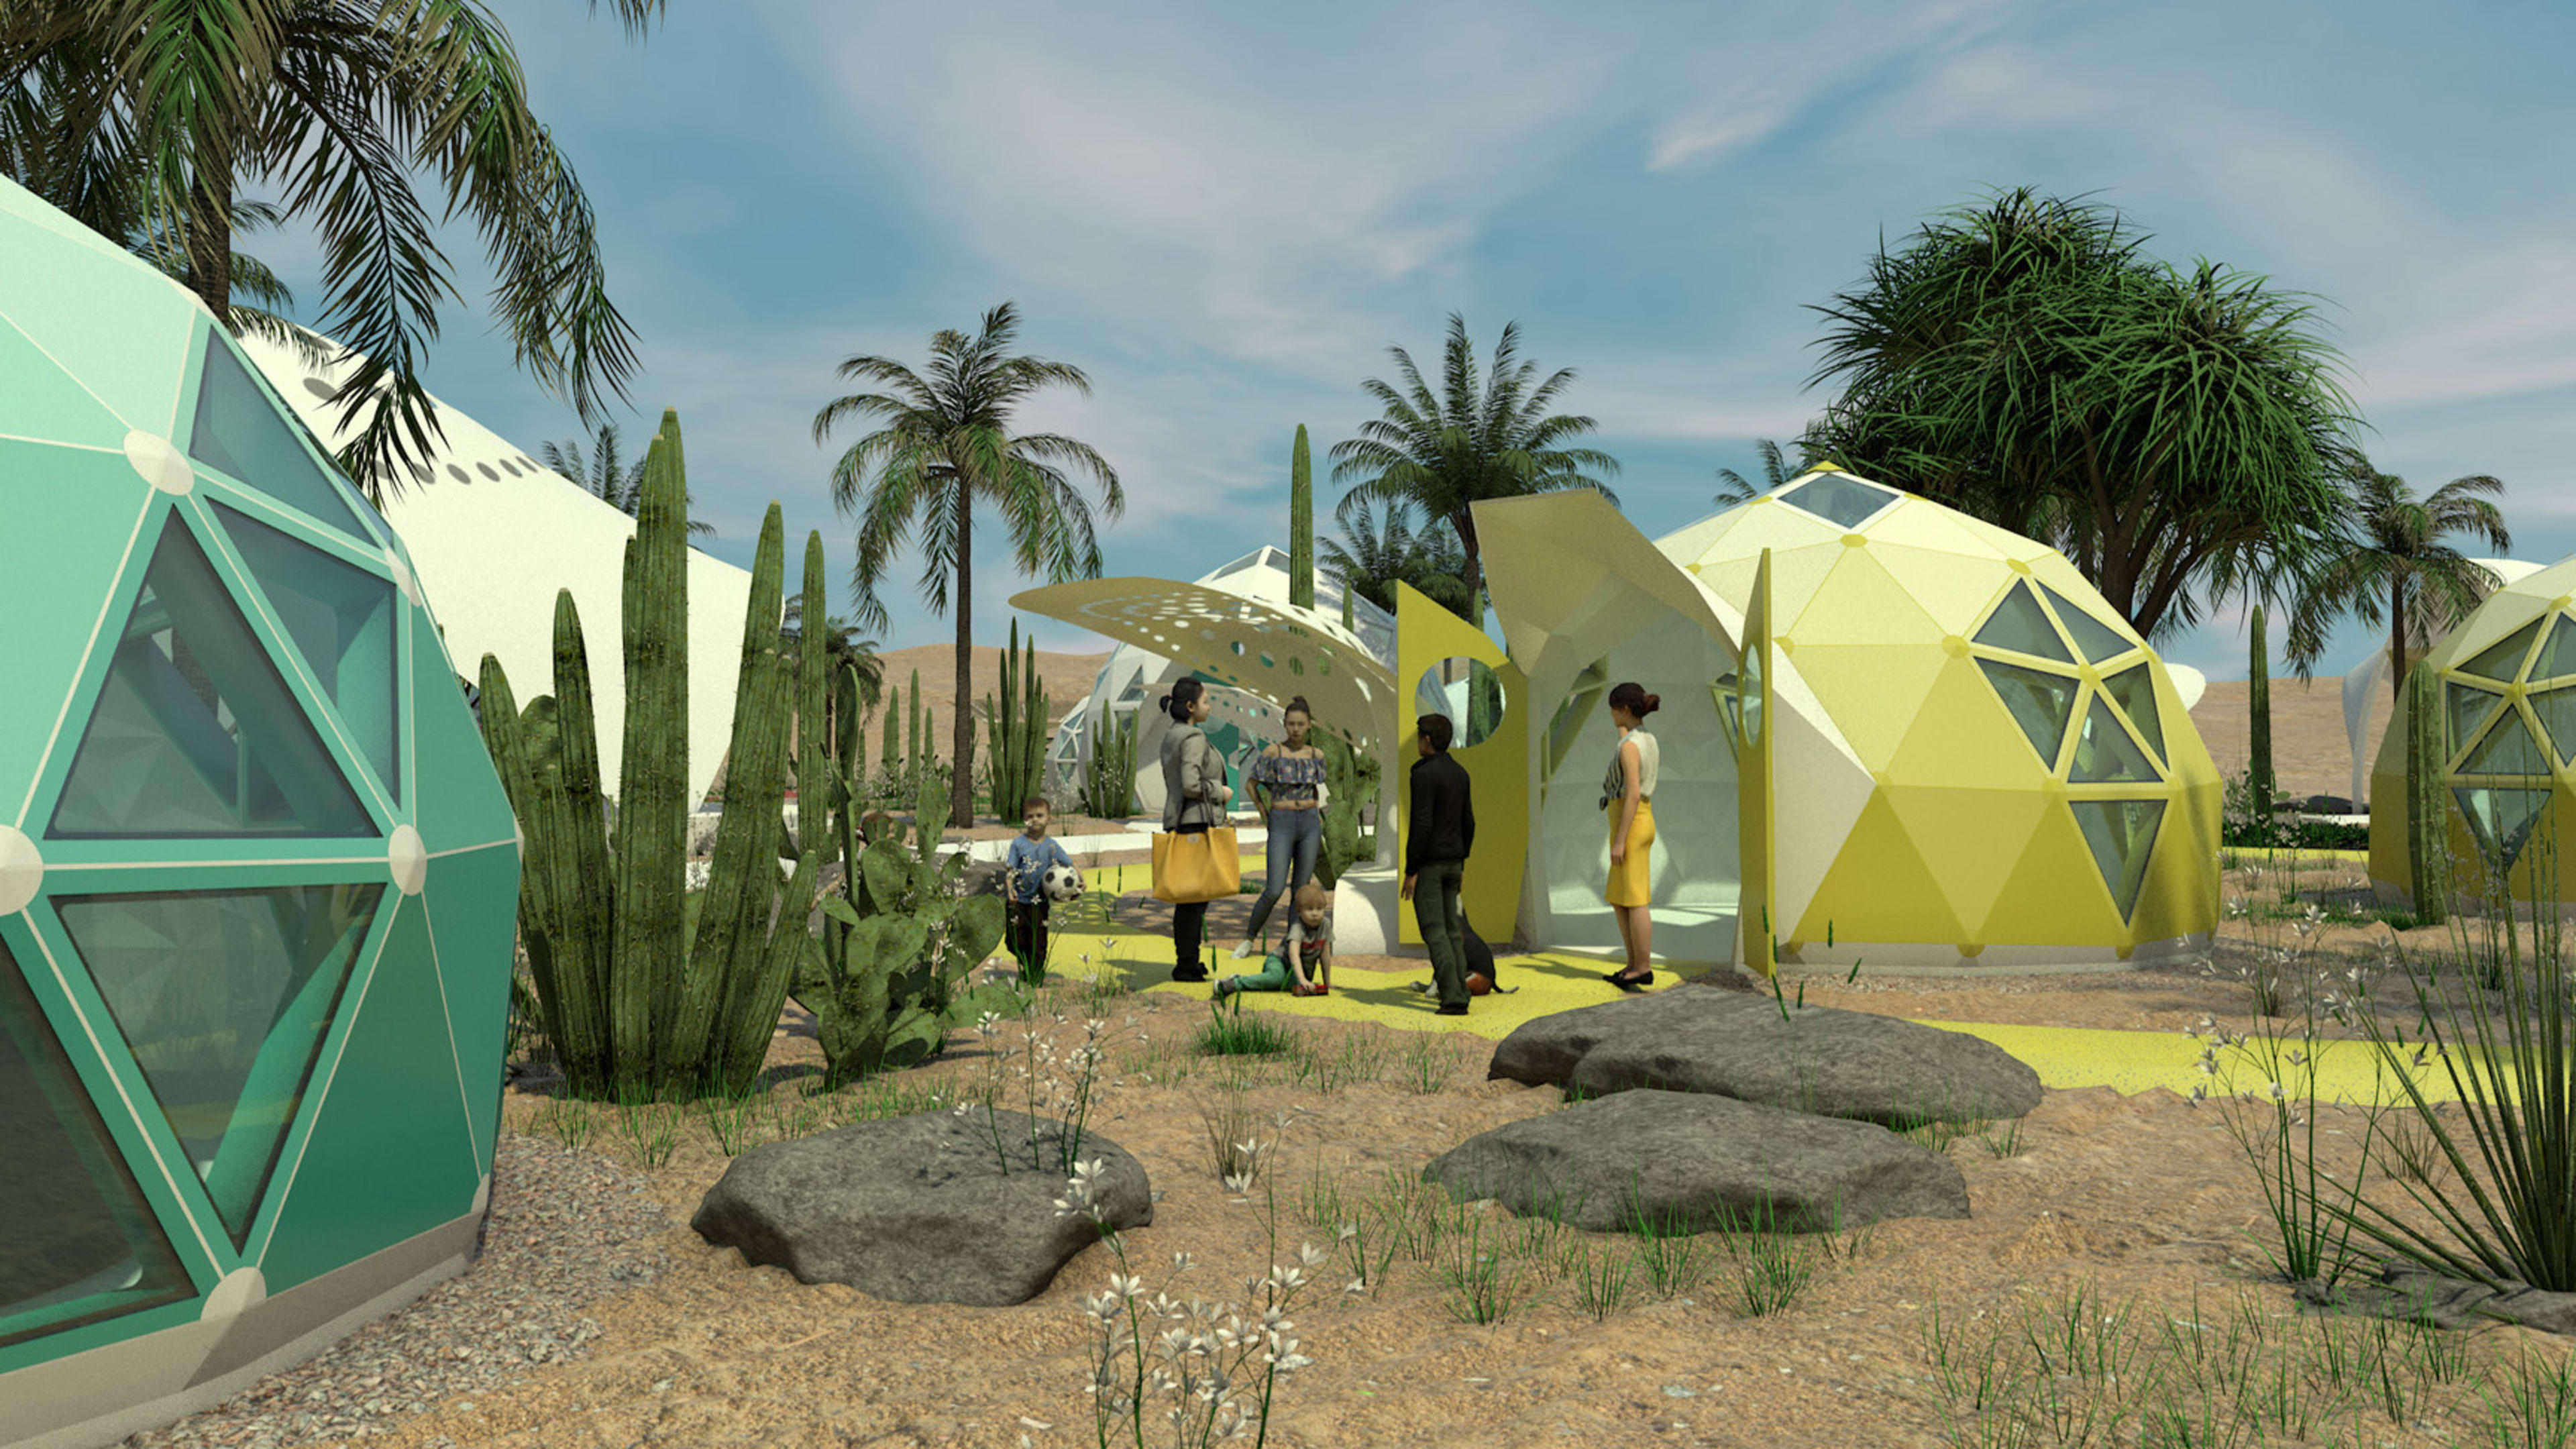 Zappos wants to help build a geodesic dome city for Las Vegas’s homeless residents